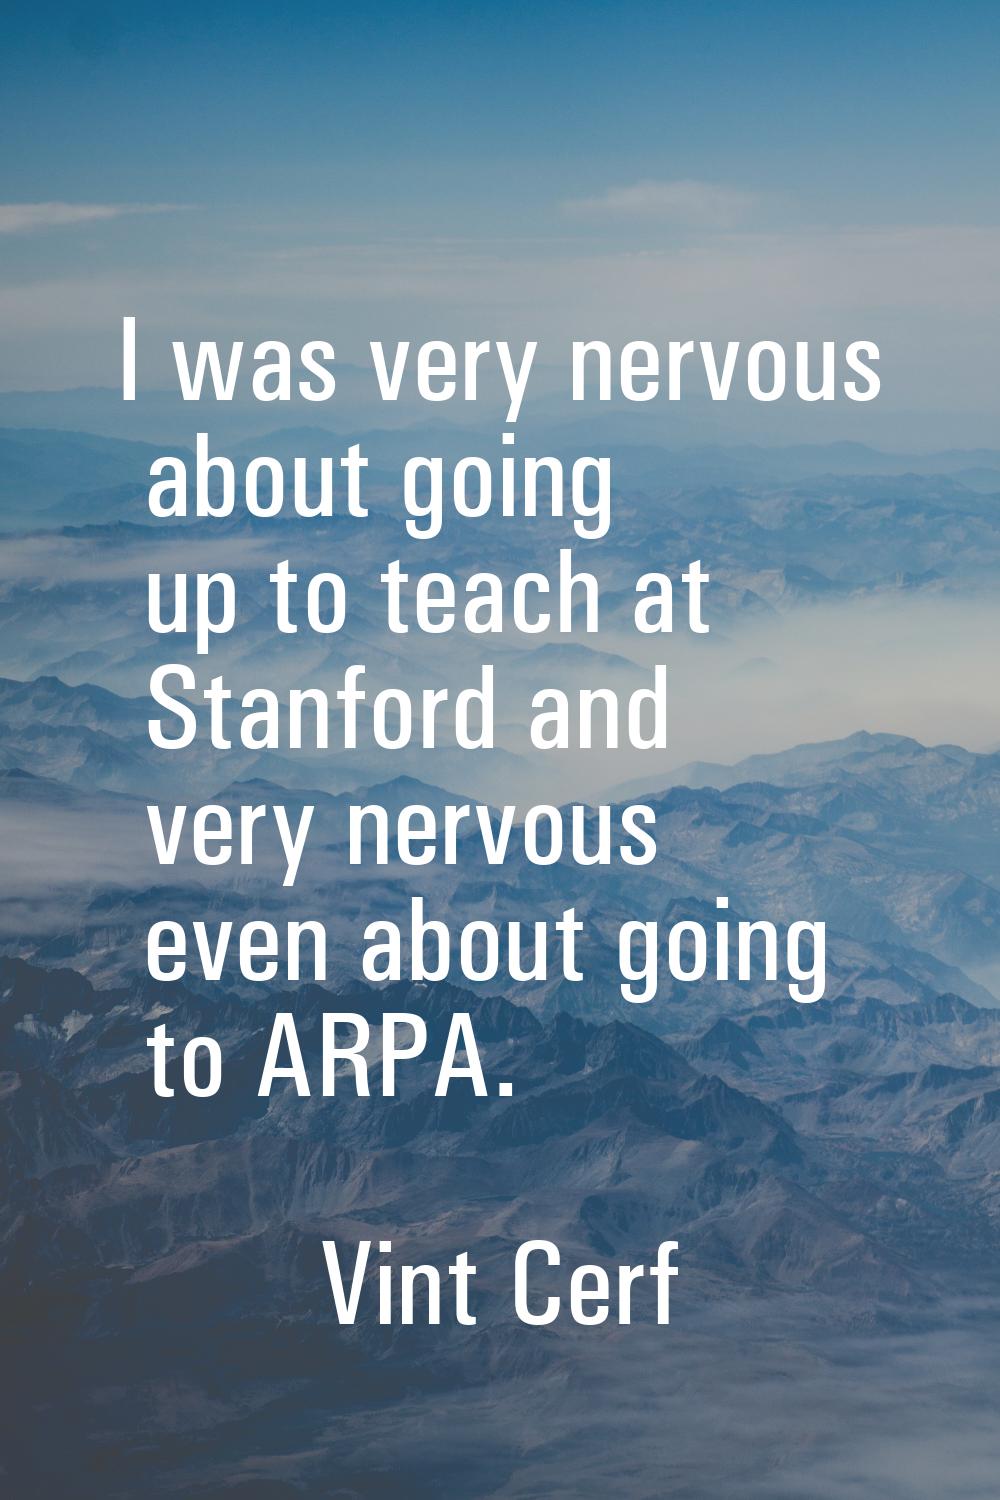 I was very nervous about going up to teach at Stanford and very nervous even about going to ARPA.